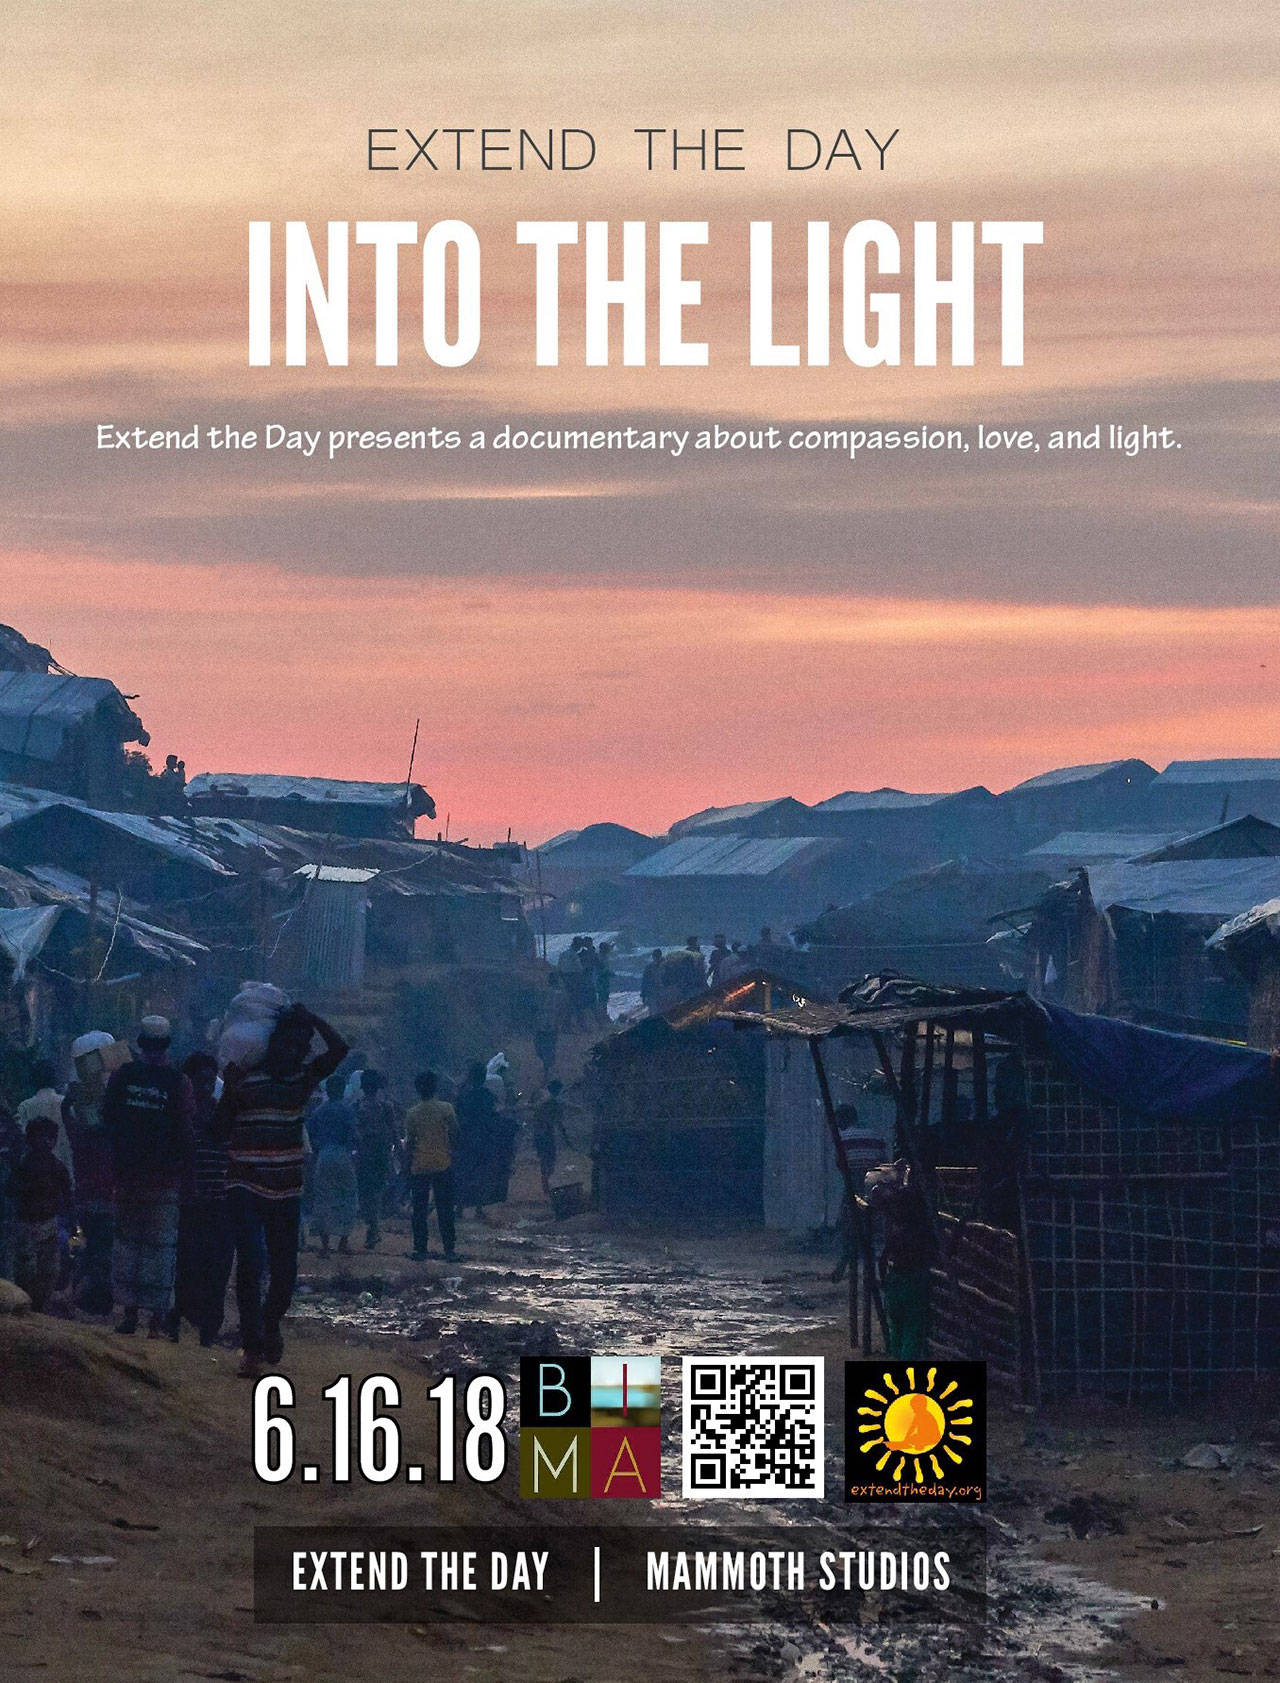 Image courtesy of Jo Lonseth | Extend the Day, a Bainbridge-based organization that provides inexpensive solar powered reading lights to school children who live without electricity, will screen their documentary film “Into the Light” at the Bainbridge Island Museum of Art at 5 p.m. Saturday, June 16.